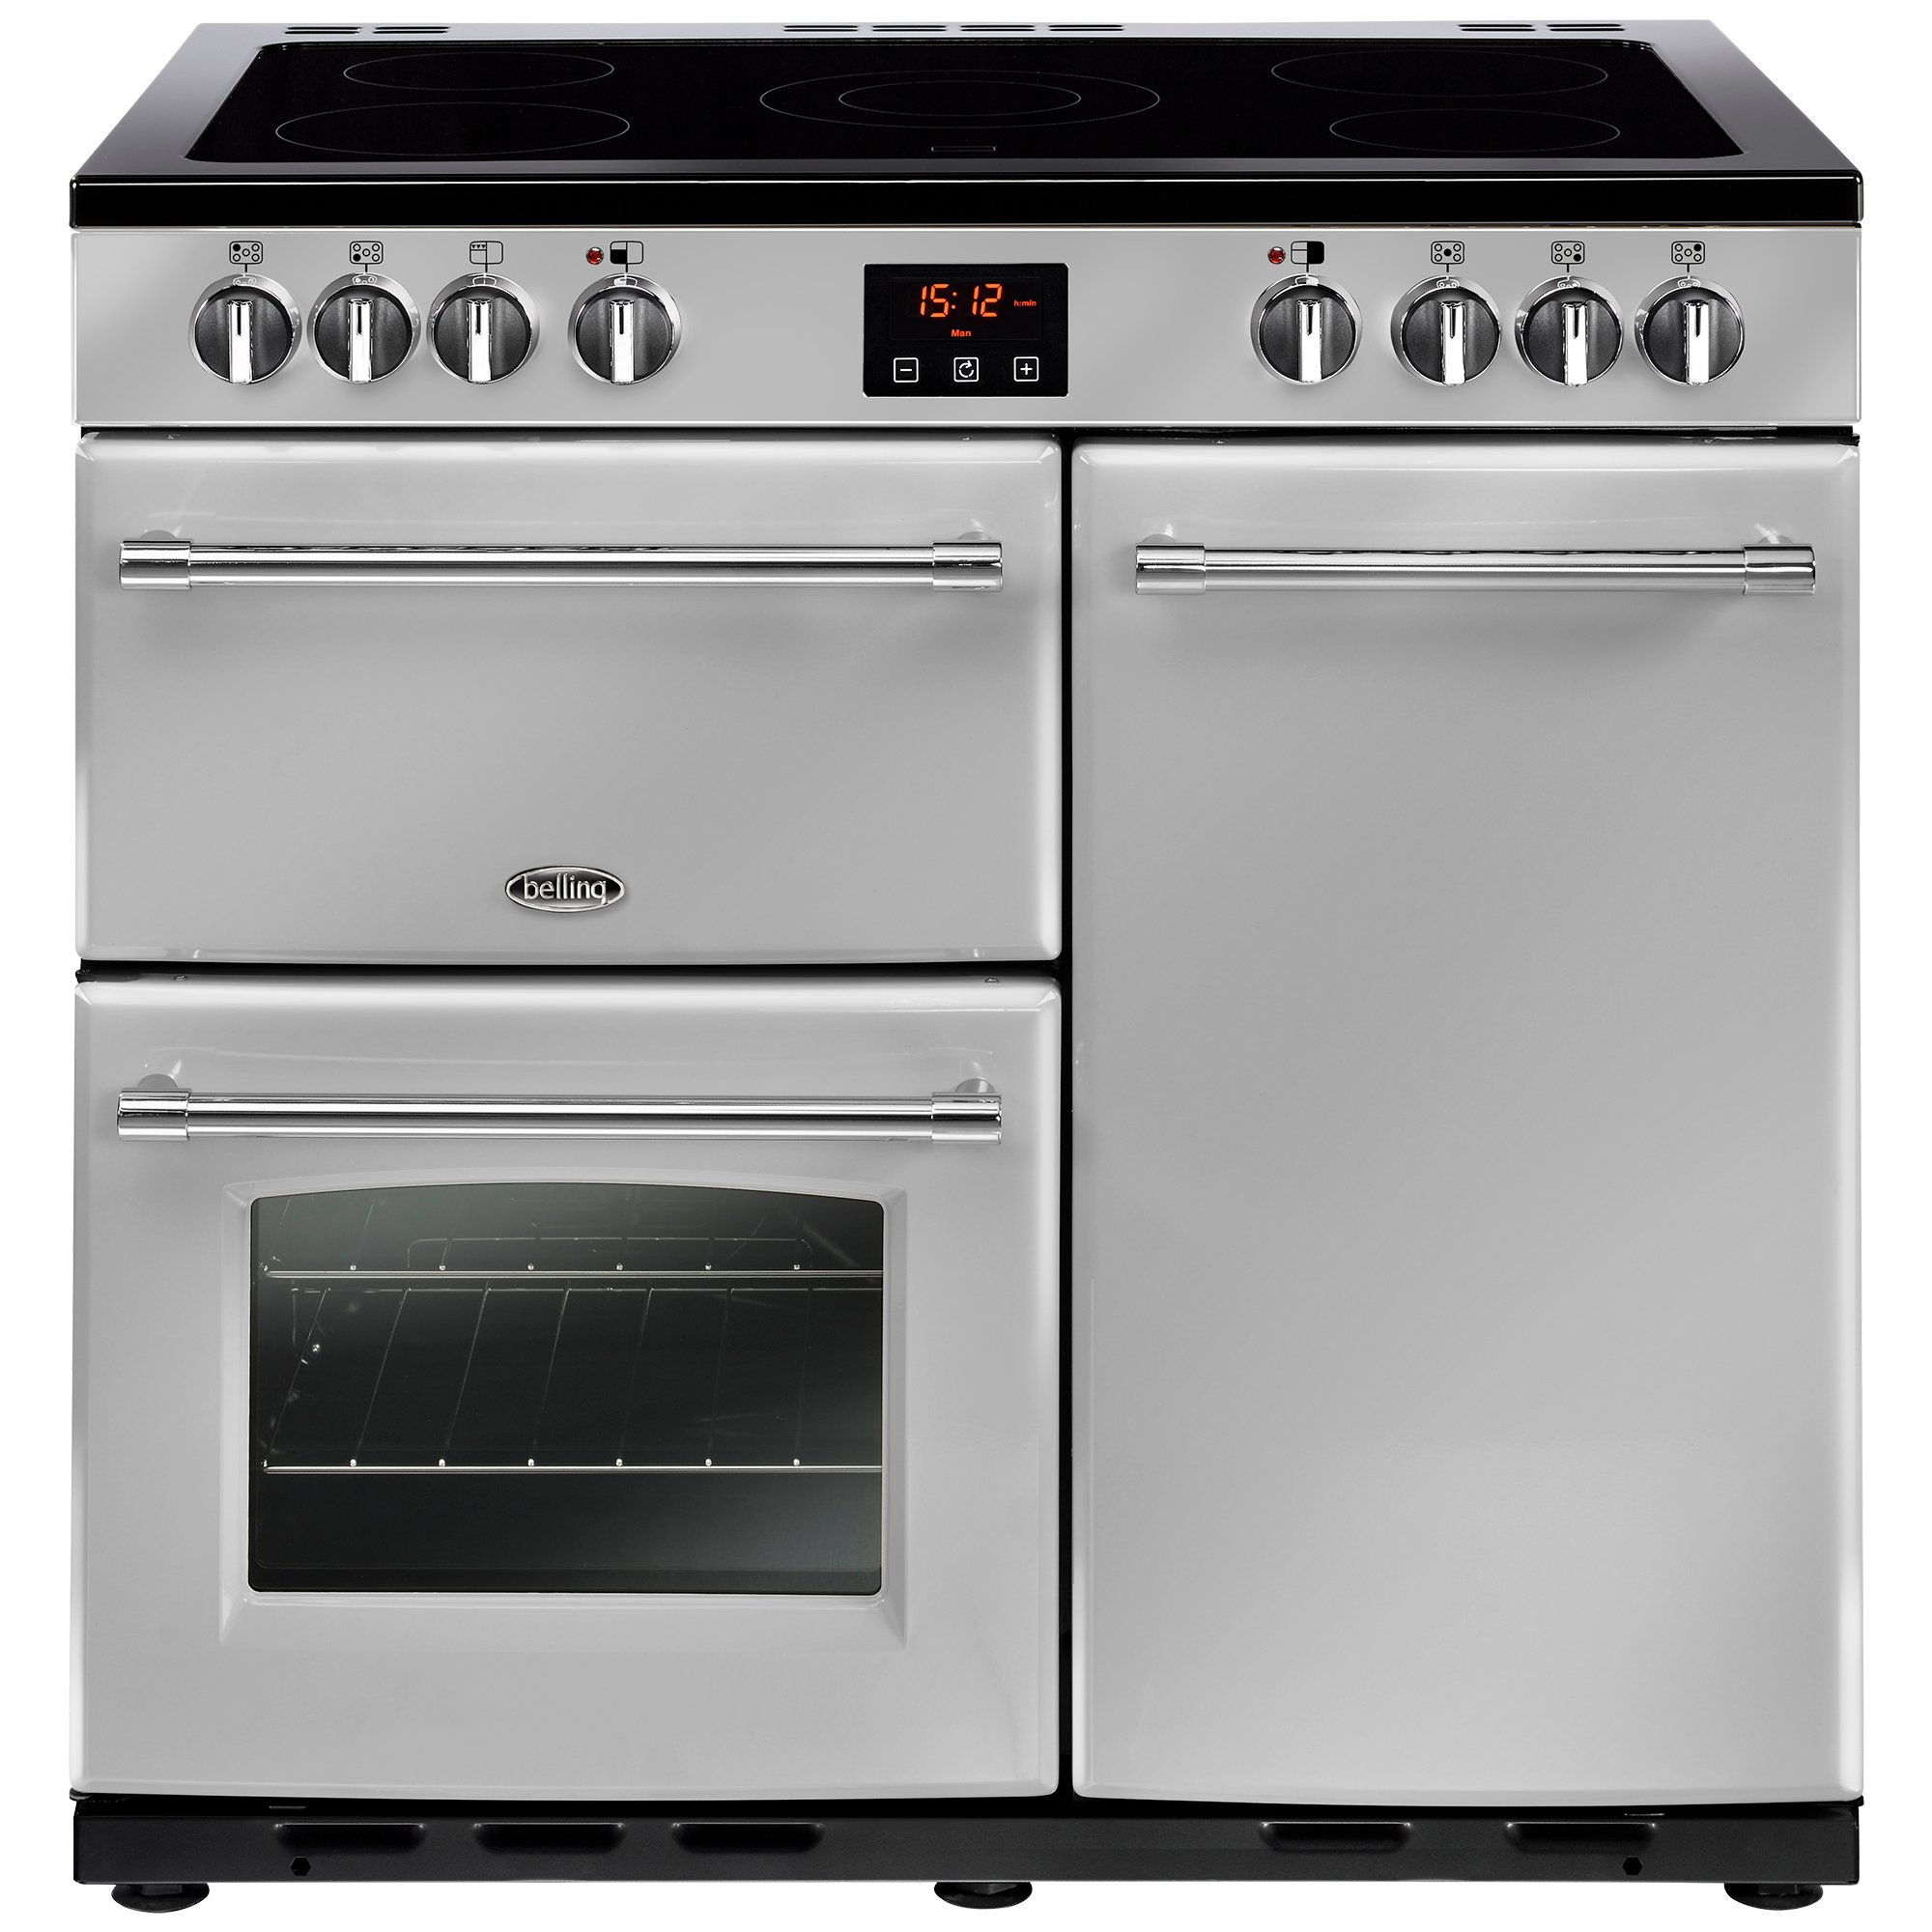 90cm electric range cooker with 5 zone ceramic hob, Maxi-Clock, market leading tall oven and easy clean enamel.